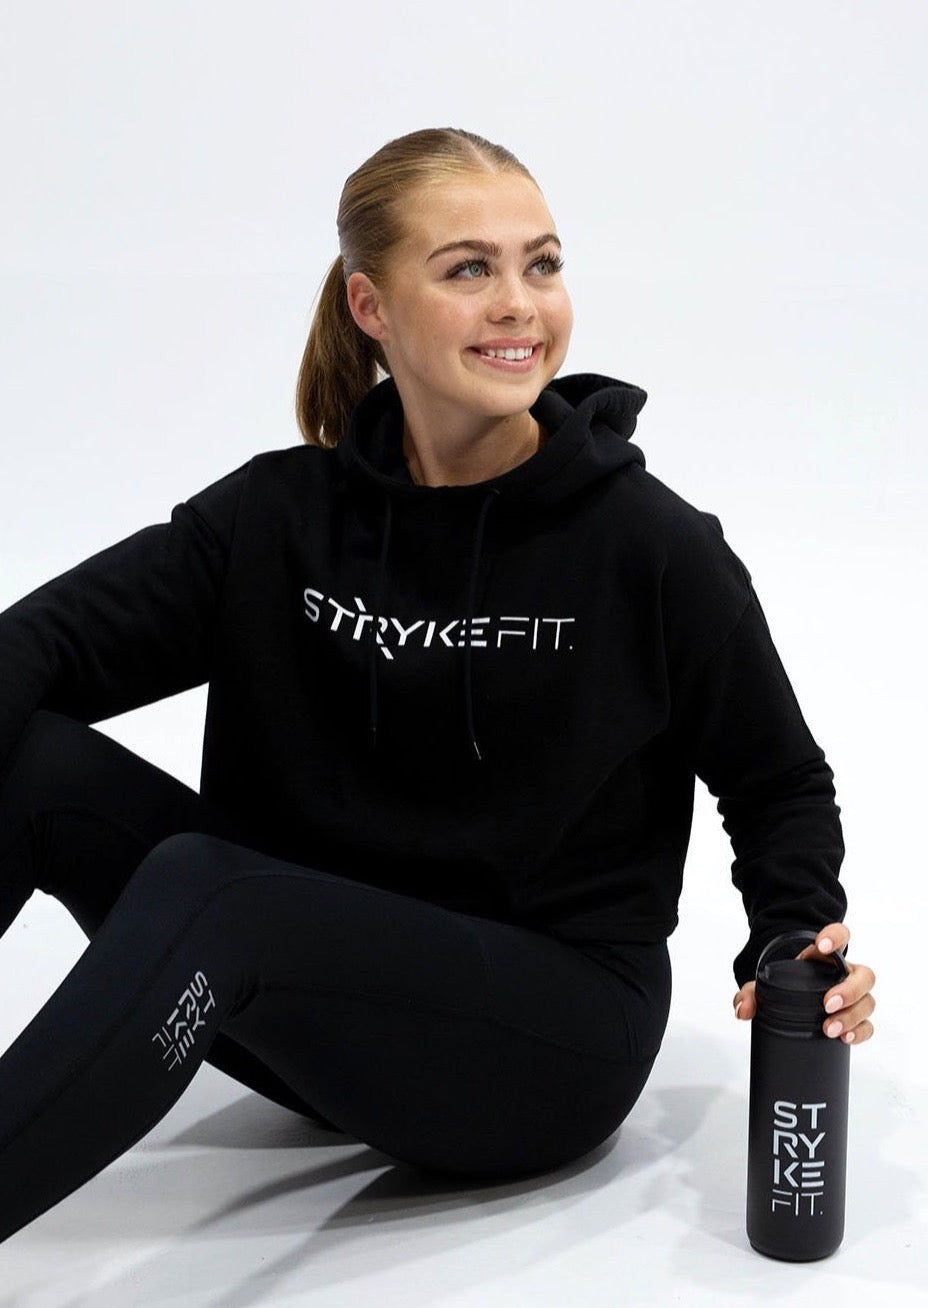 CRU TEAM CROP FLEECE is a staple in any wardrobe. Made from premium brushed fleece this style has a self-lined hood and provides a casual look for any athlete. This fleece is the perfect garment to match back with your STRYKE FIT FAST ENDURANCE LEGGINGS.